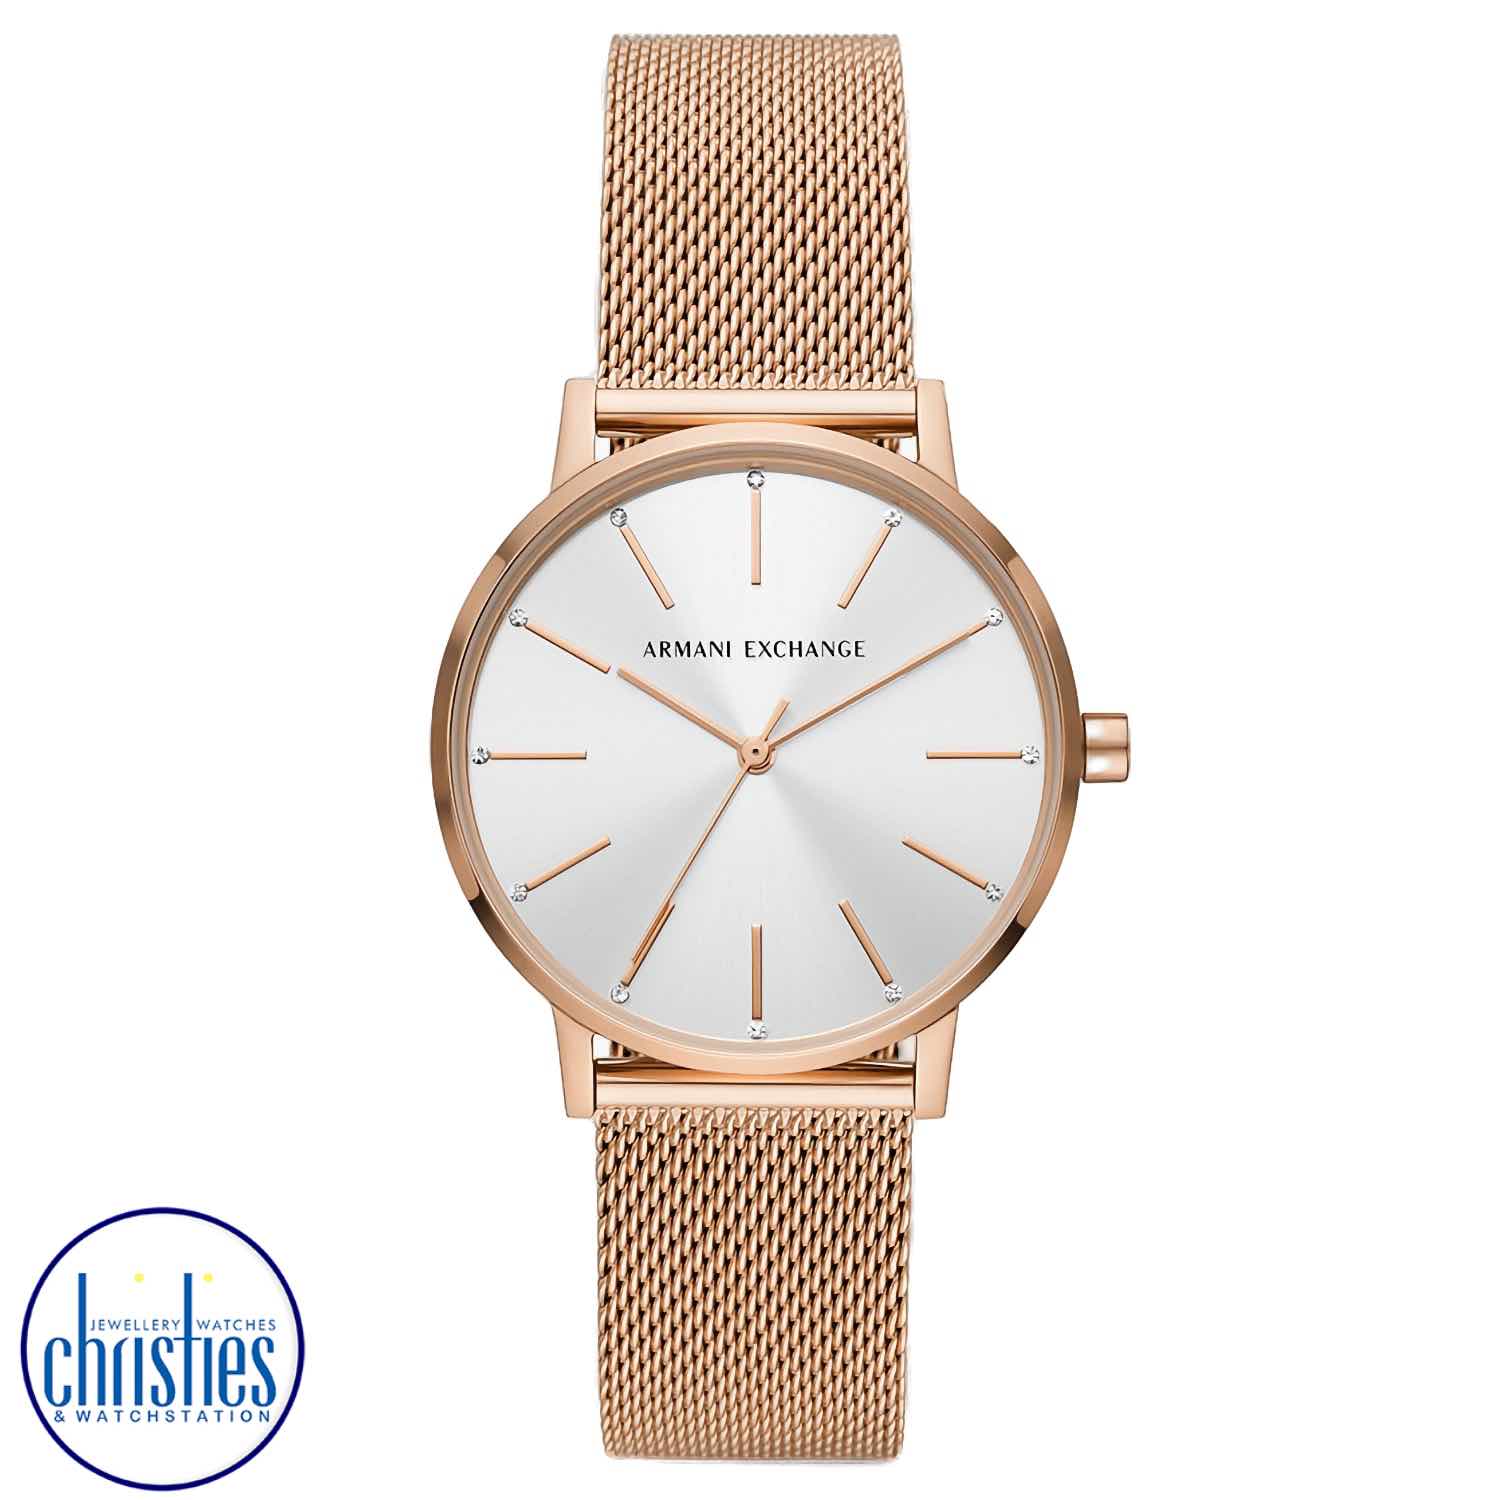 AX5573 A|X Armani Exchange Rose Gold-Tone Stainless Steel Mesh Watch. AX5573 A|X Armani Exchange Rose Gold-Tone Stainless Steel Mesh WatchAfterpay - Split your purchase into 4 instalments - Pay for your purchase over 4 instalments, due every two weeks.